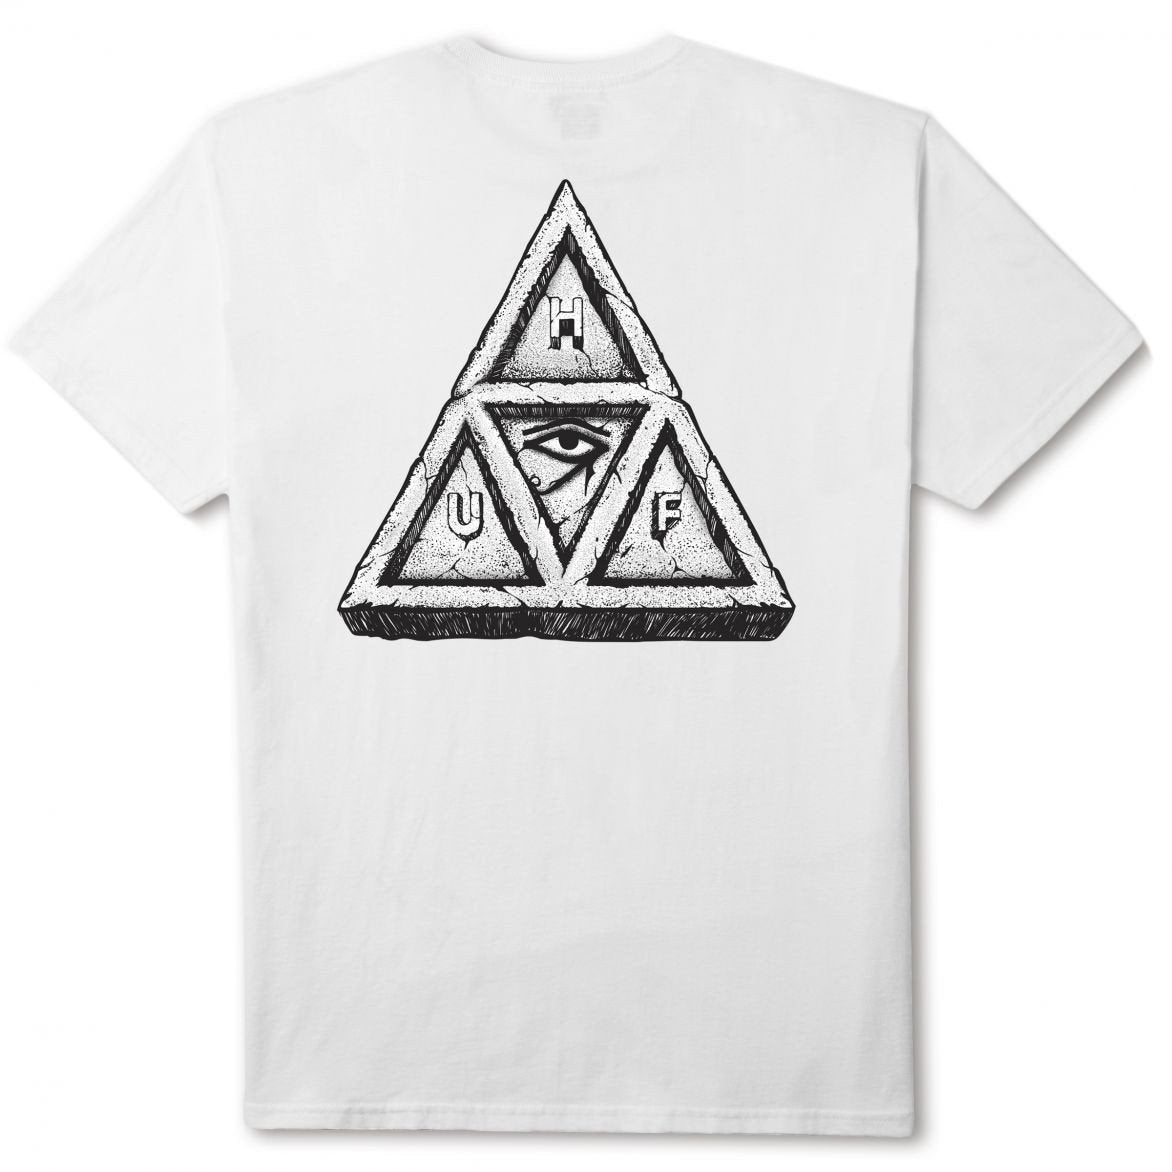 TS00048 HUF SUMRA TRIPLE TRIANGLE TEE \\ WHITE-The Collateral